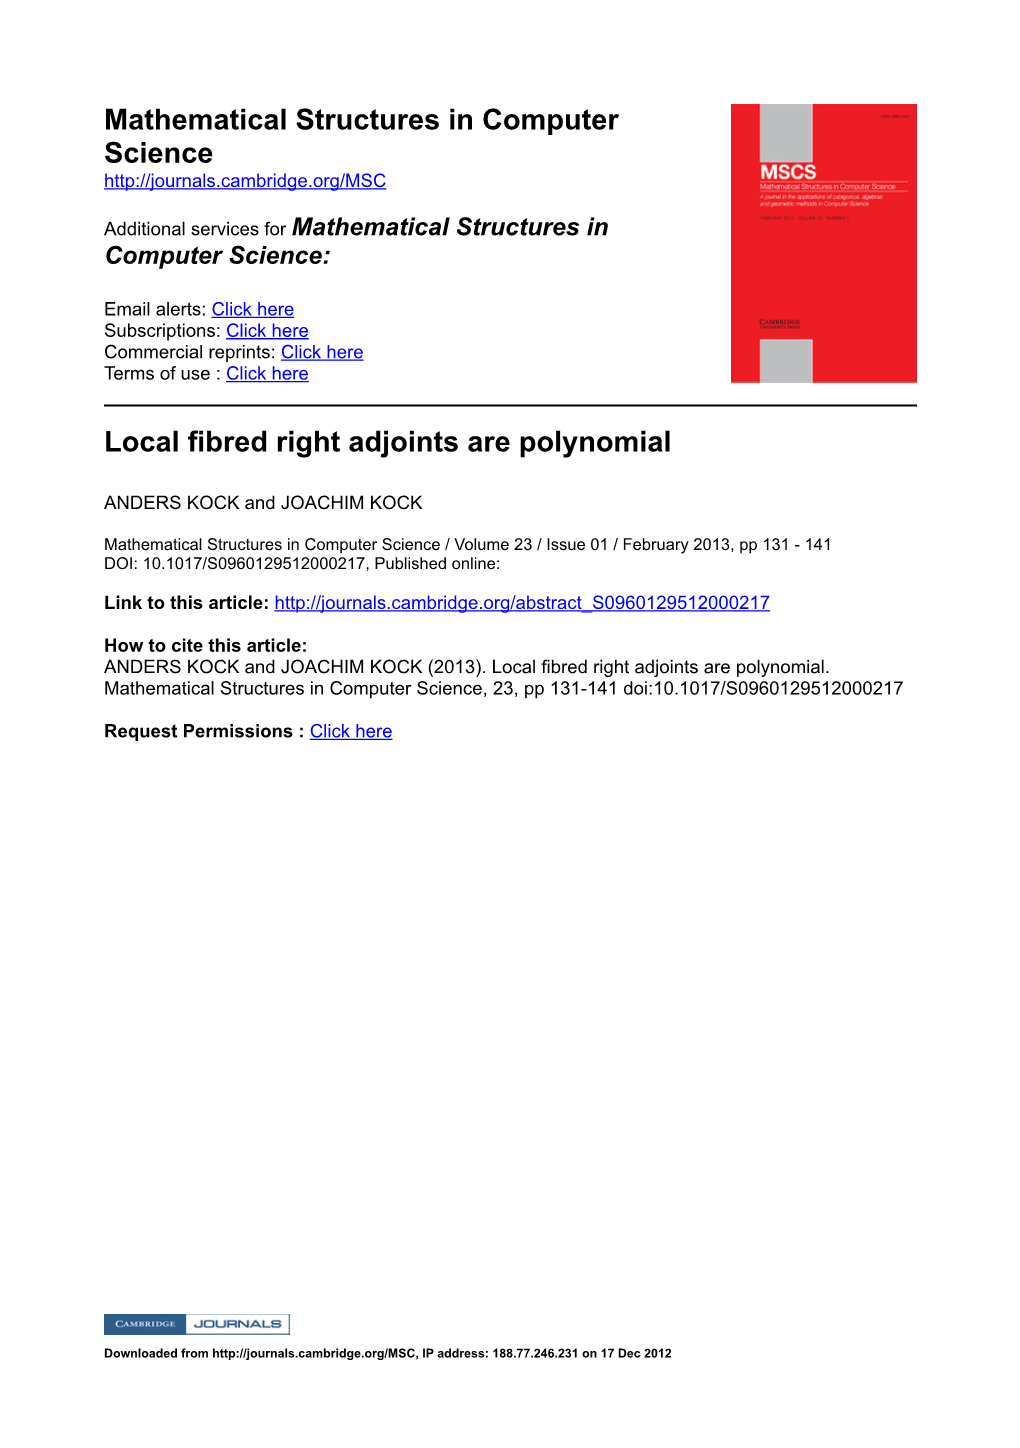 Mathematical Structures in Computer Science Local Fibred Right Adjoints